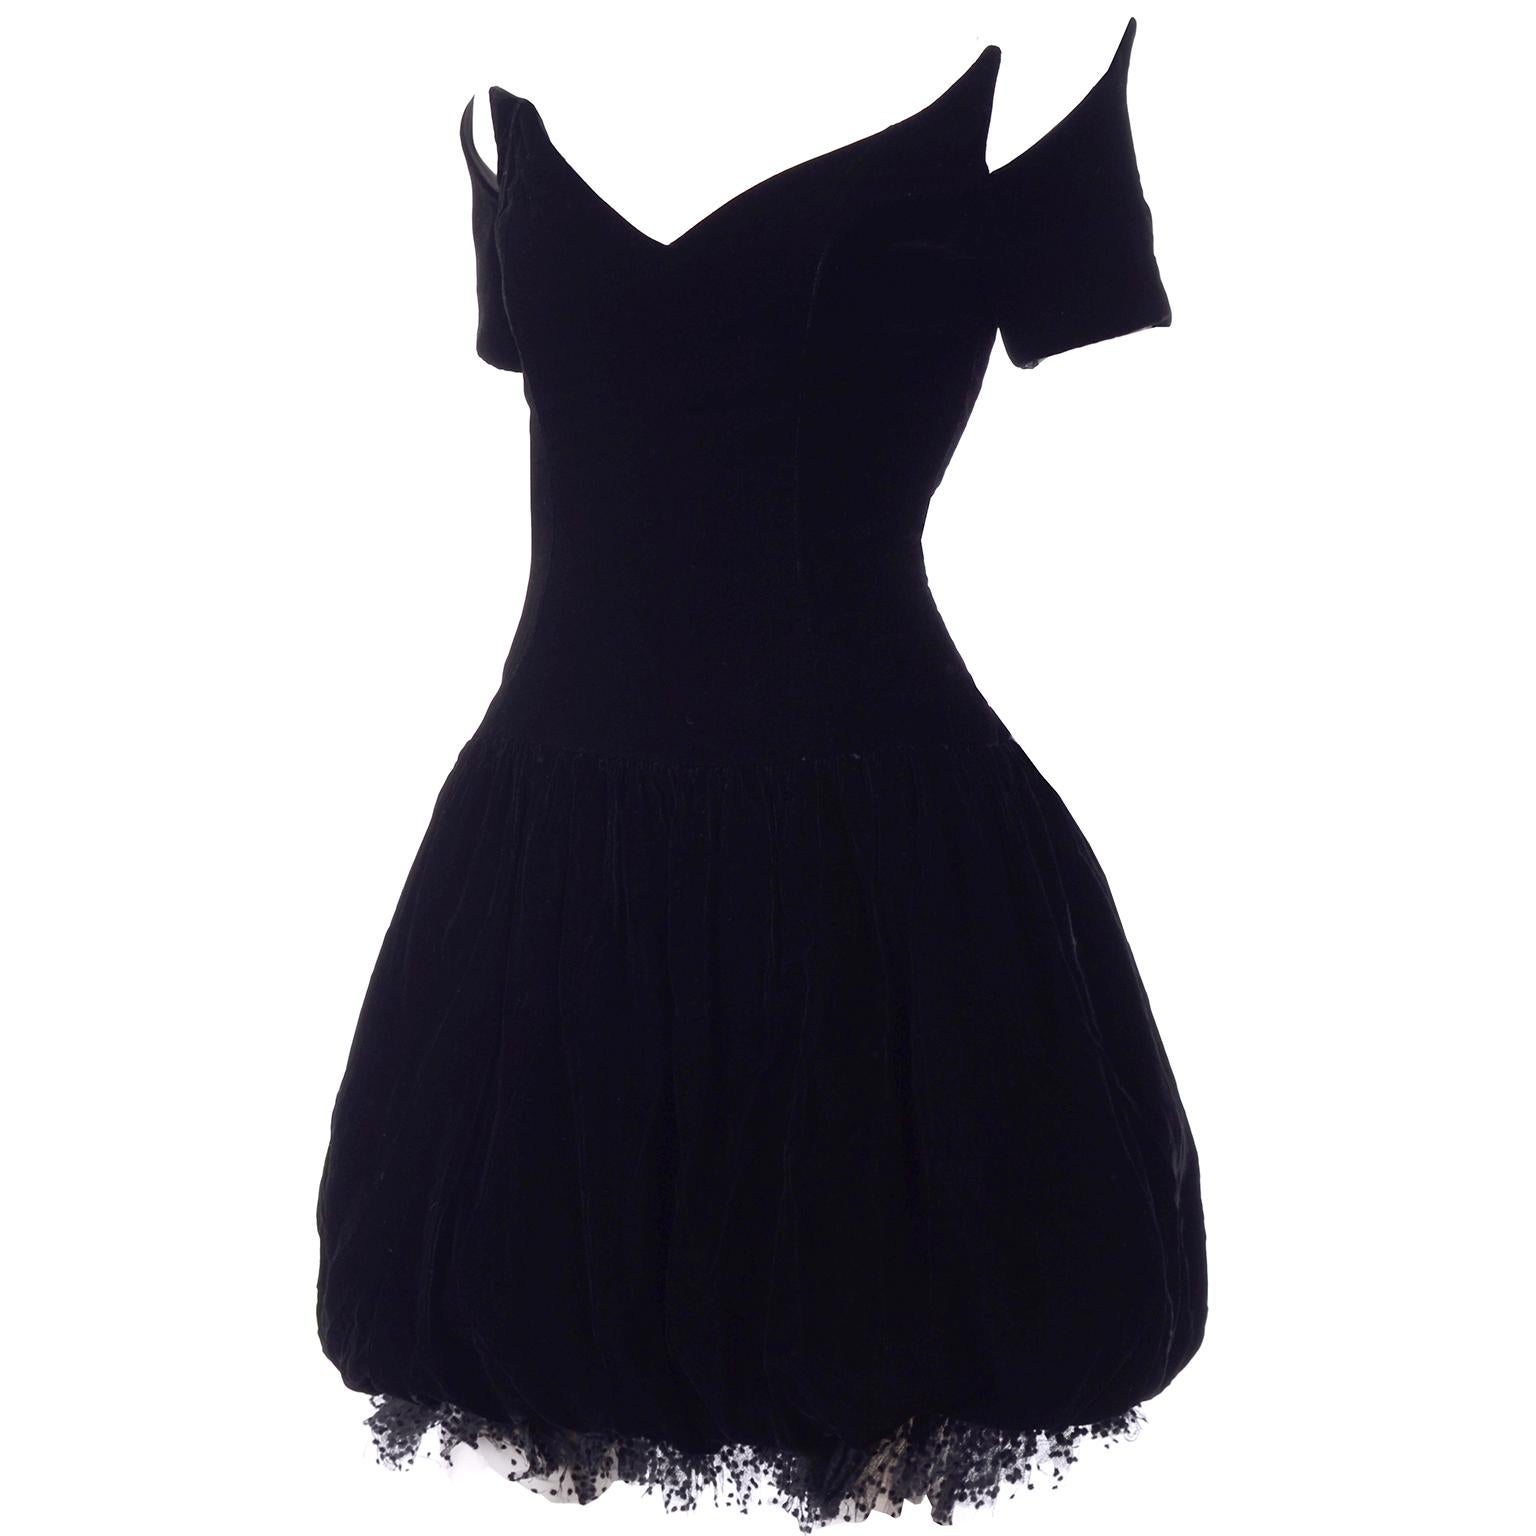 This is an absolutely stunning vintage black velvet Christian Dior party dress! This Dior beauty has a pouf skirt and a 2